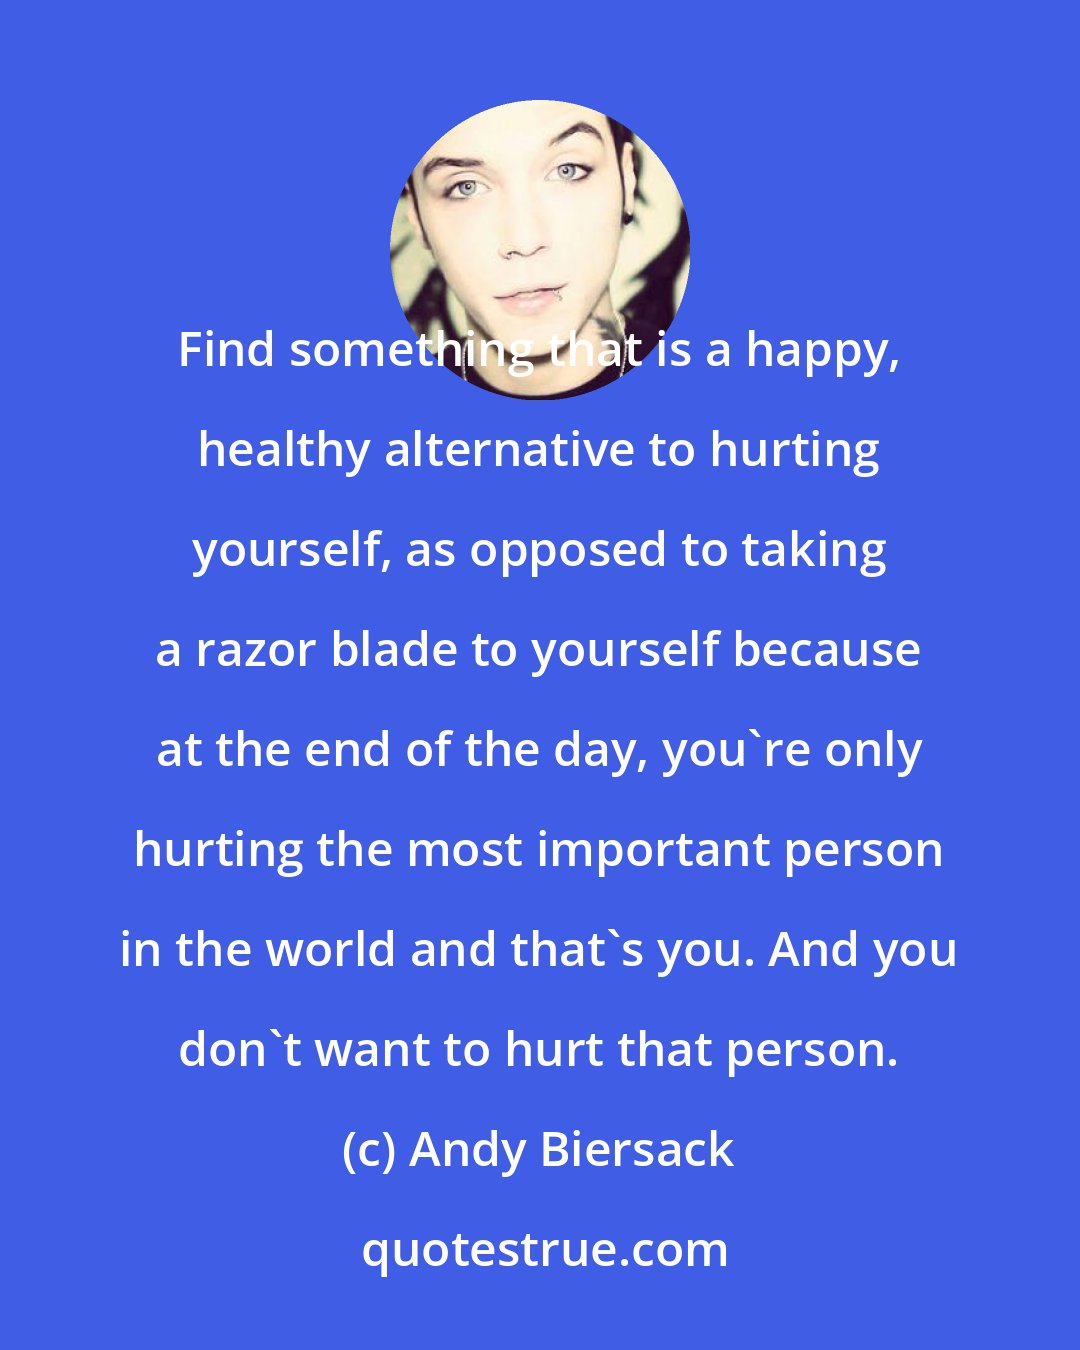 Andy Biersack: Find something that is a happy, healthy alternative to hurting yourself, as opposed to taking a razor blade to yourself because at the end of the day, you're only hurting the most important person in the world and that's you. And you don't want to hurt that person.